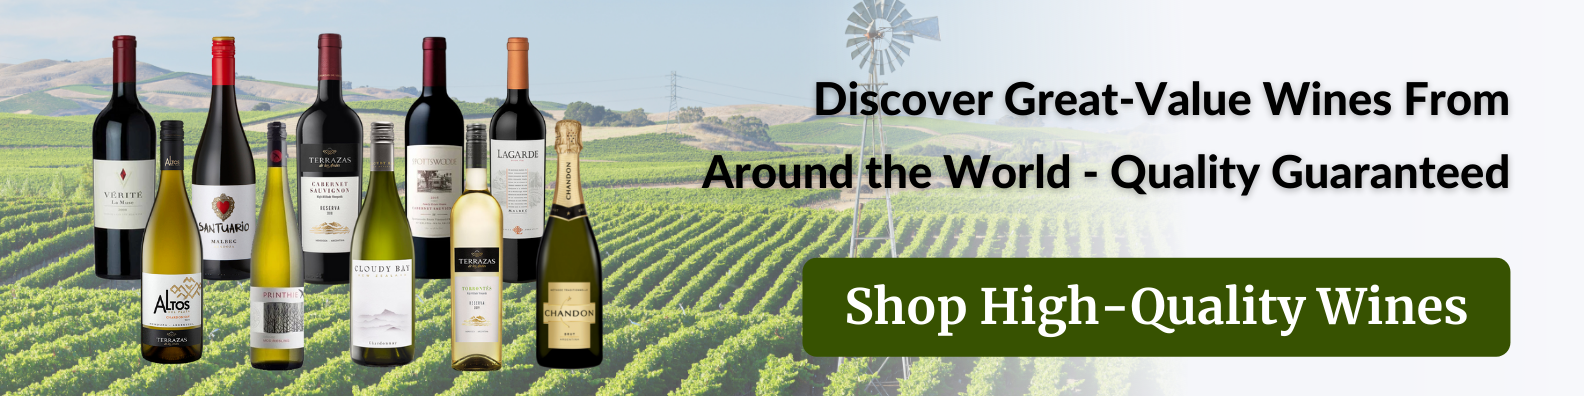 shop great value wines in the philippines quality guaranteed